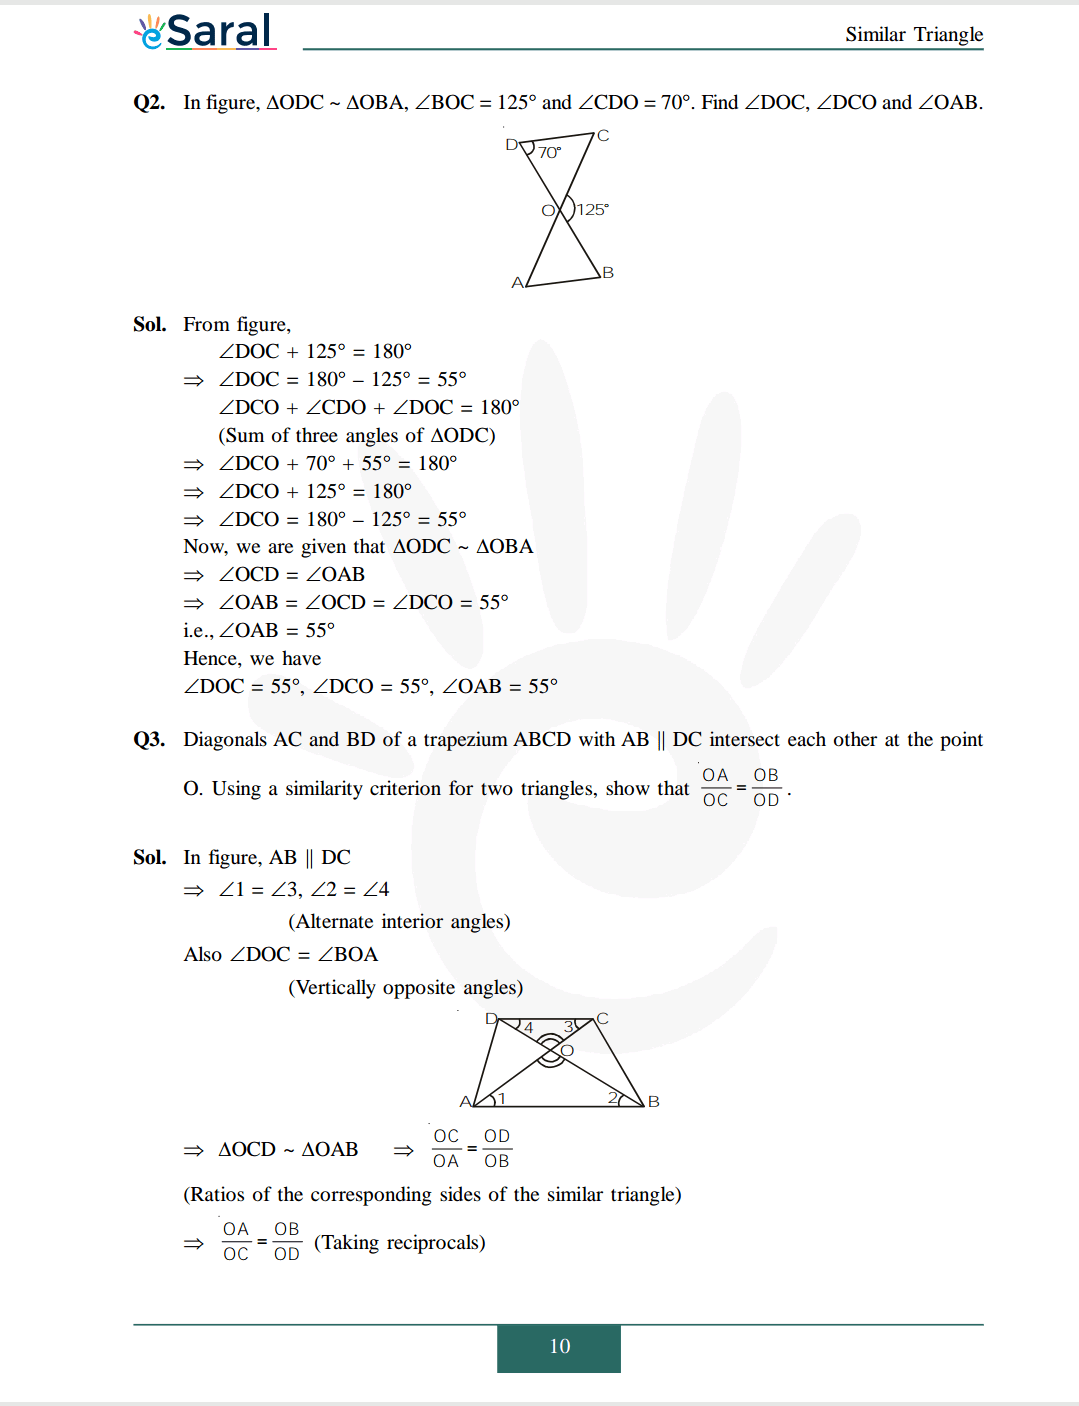 Class 10 Maths Chapter 6 exercise 6.3 solutions Image 3